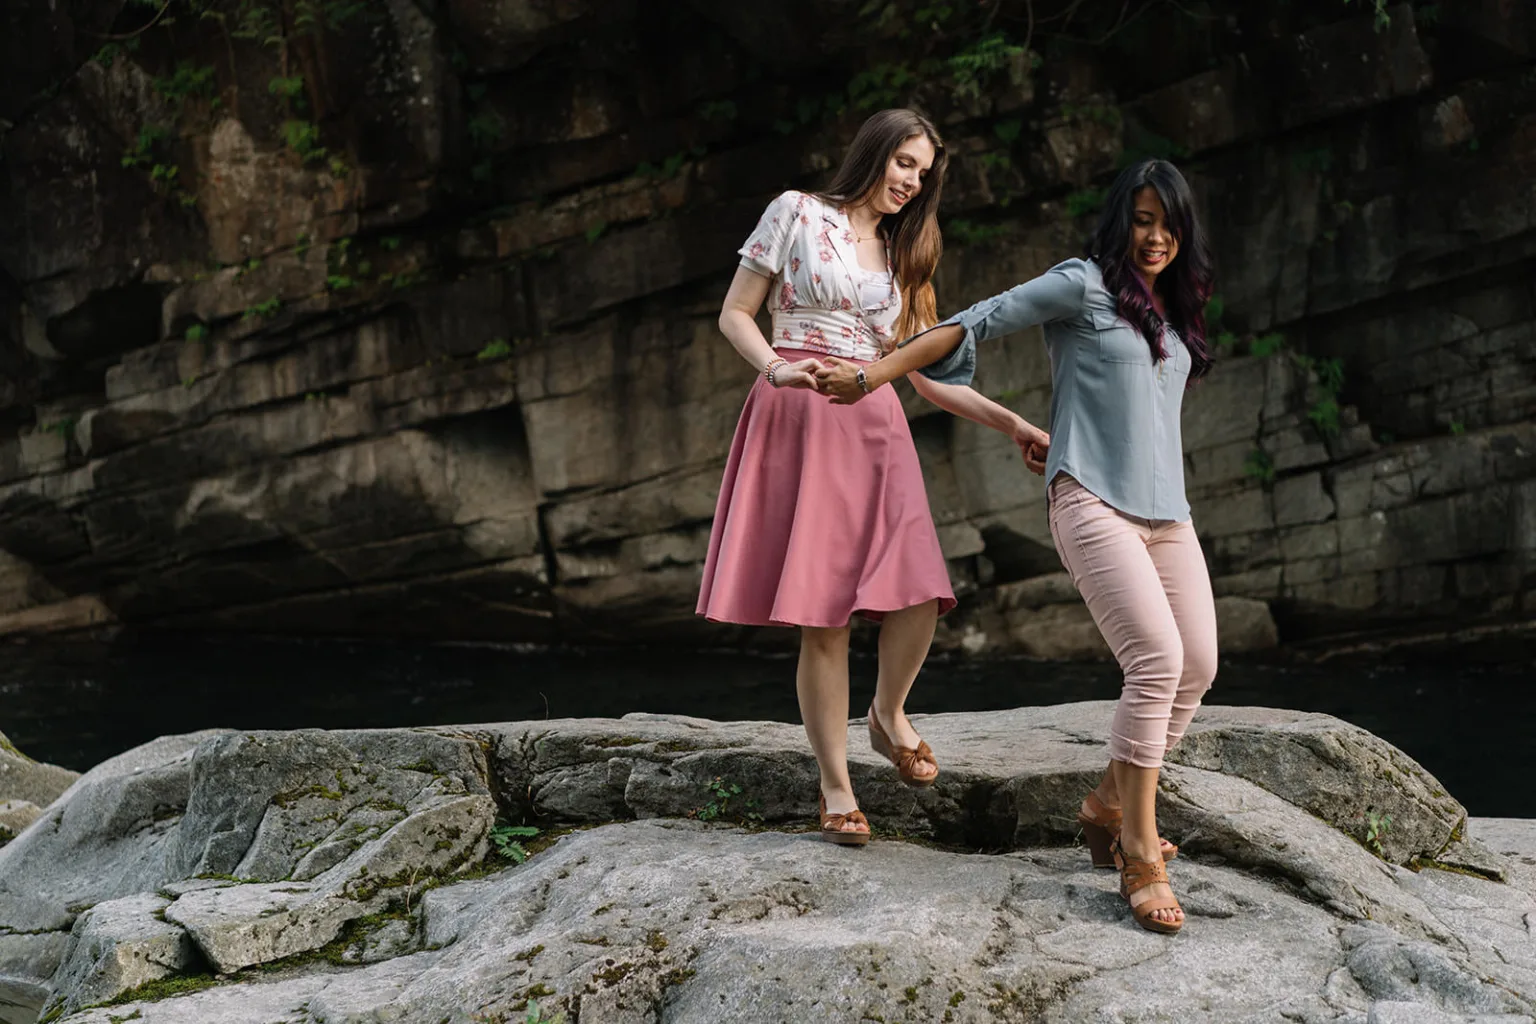 Two women walking hand in hand on a rocky terrain. One wears a floral blouse and pink skirt, while the other wears a blue top and pink pants. They navigate large stones with a background of a rocky wall. Both appear engaged and cautious. captured by Seattle Wedding Photographers Jenn Tai & Co